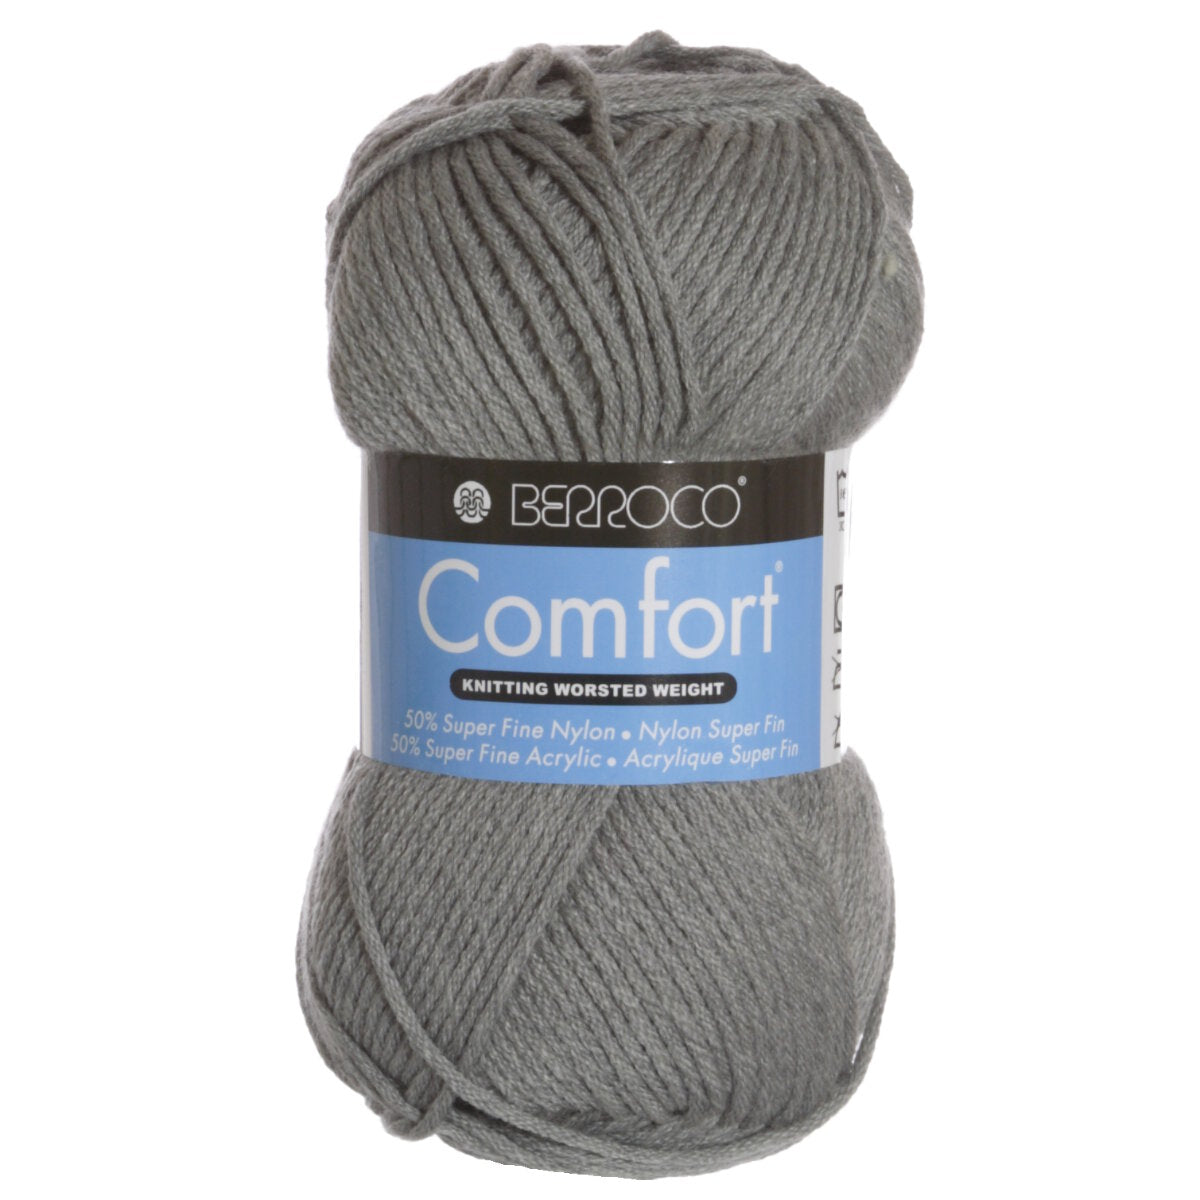 Berroco Comfort Chunky (discontinued colors)